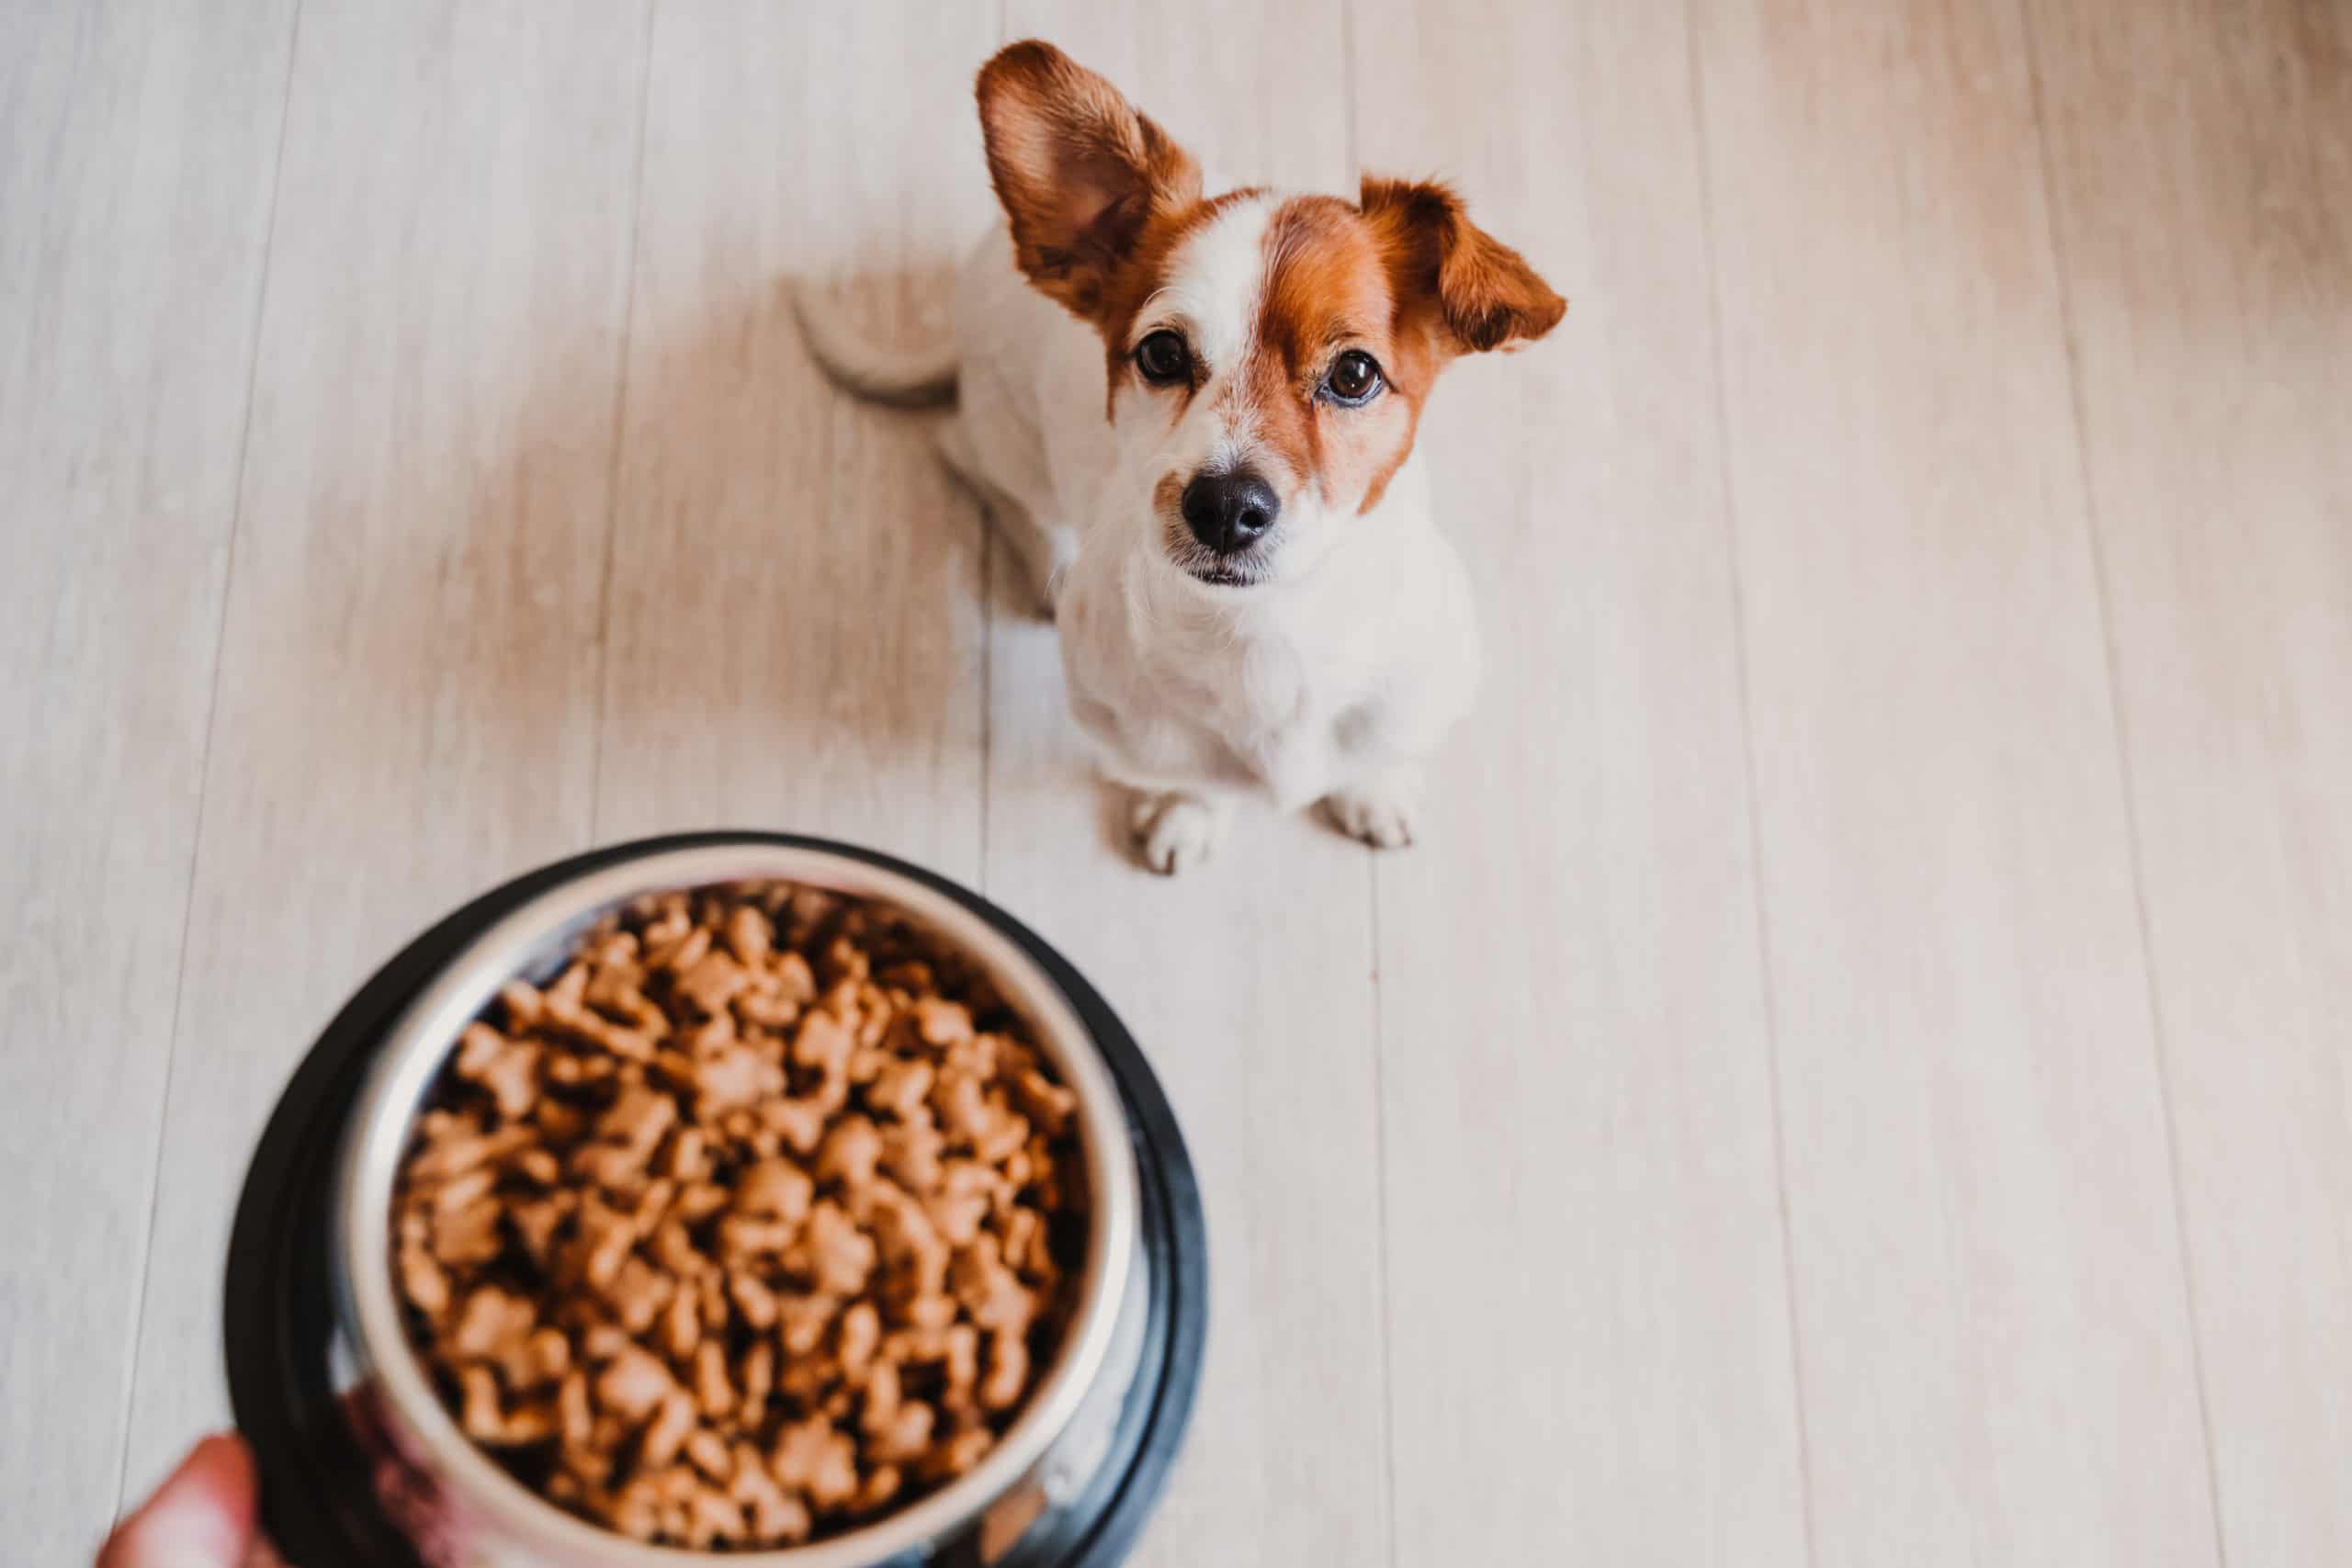 What time should I feed my dog at night?